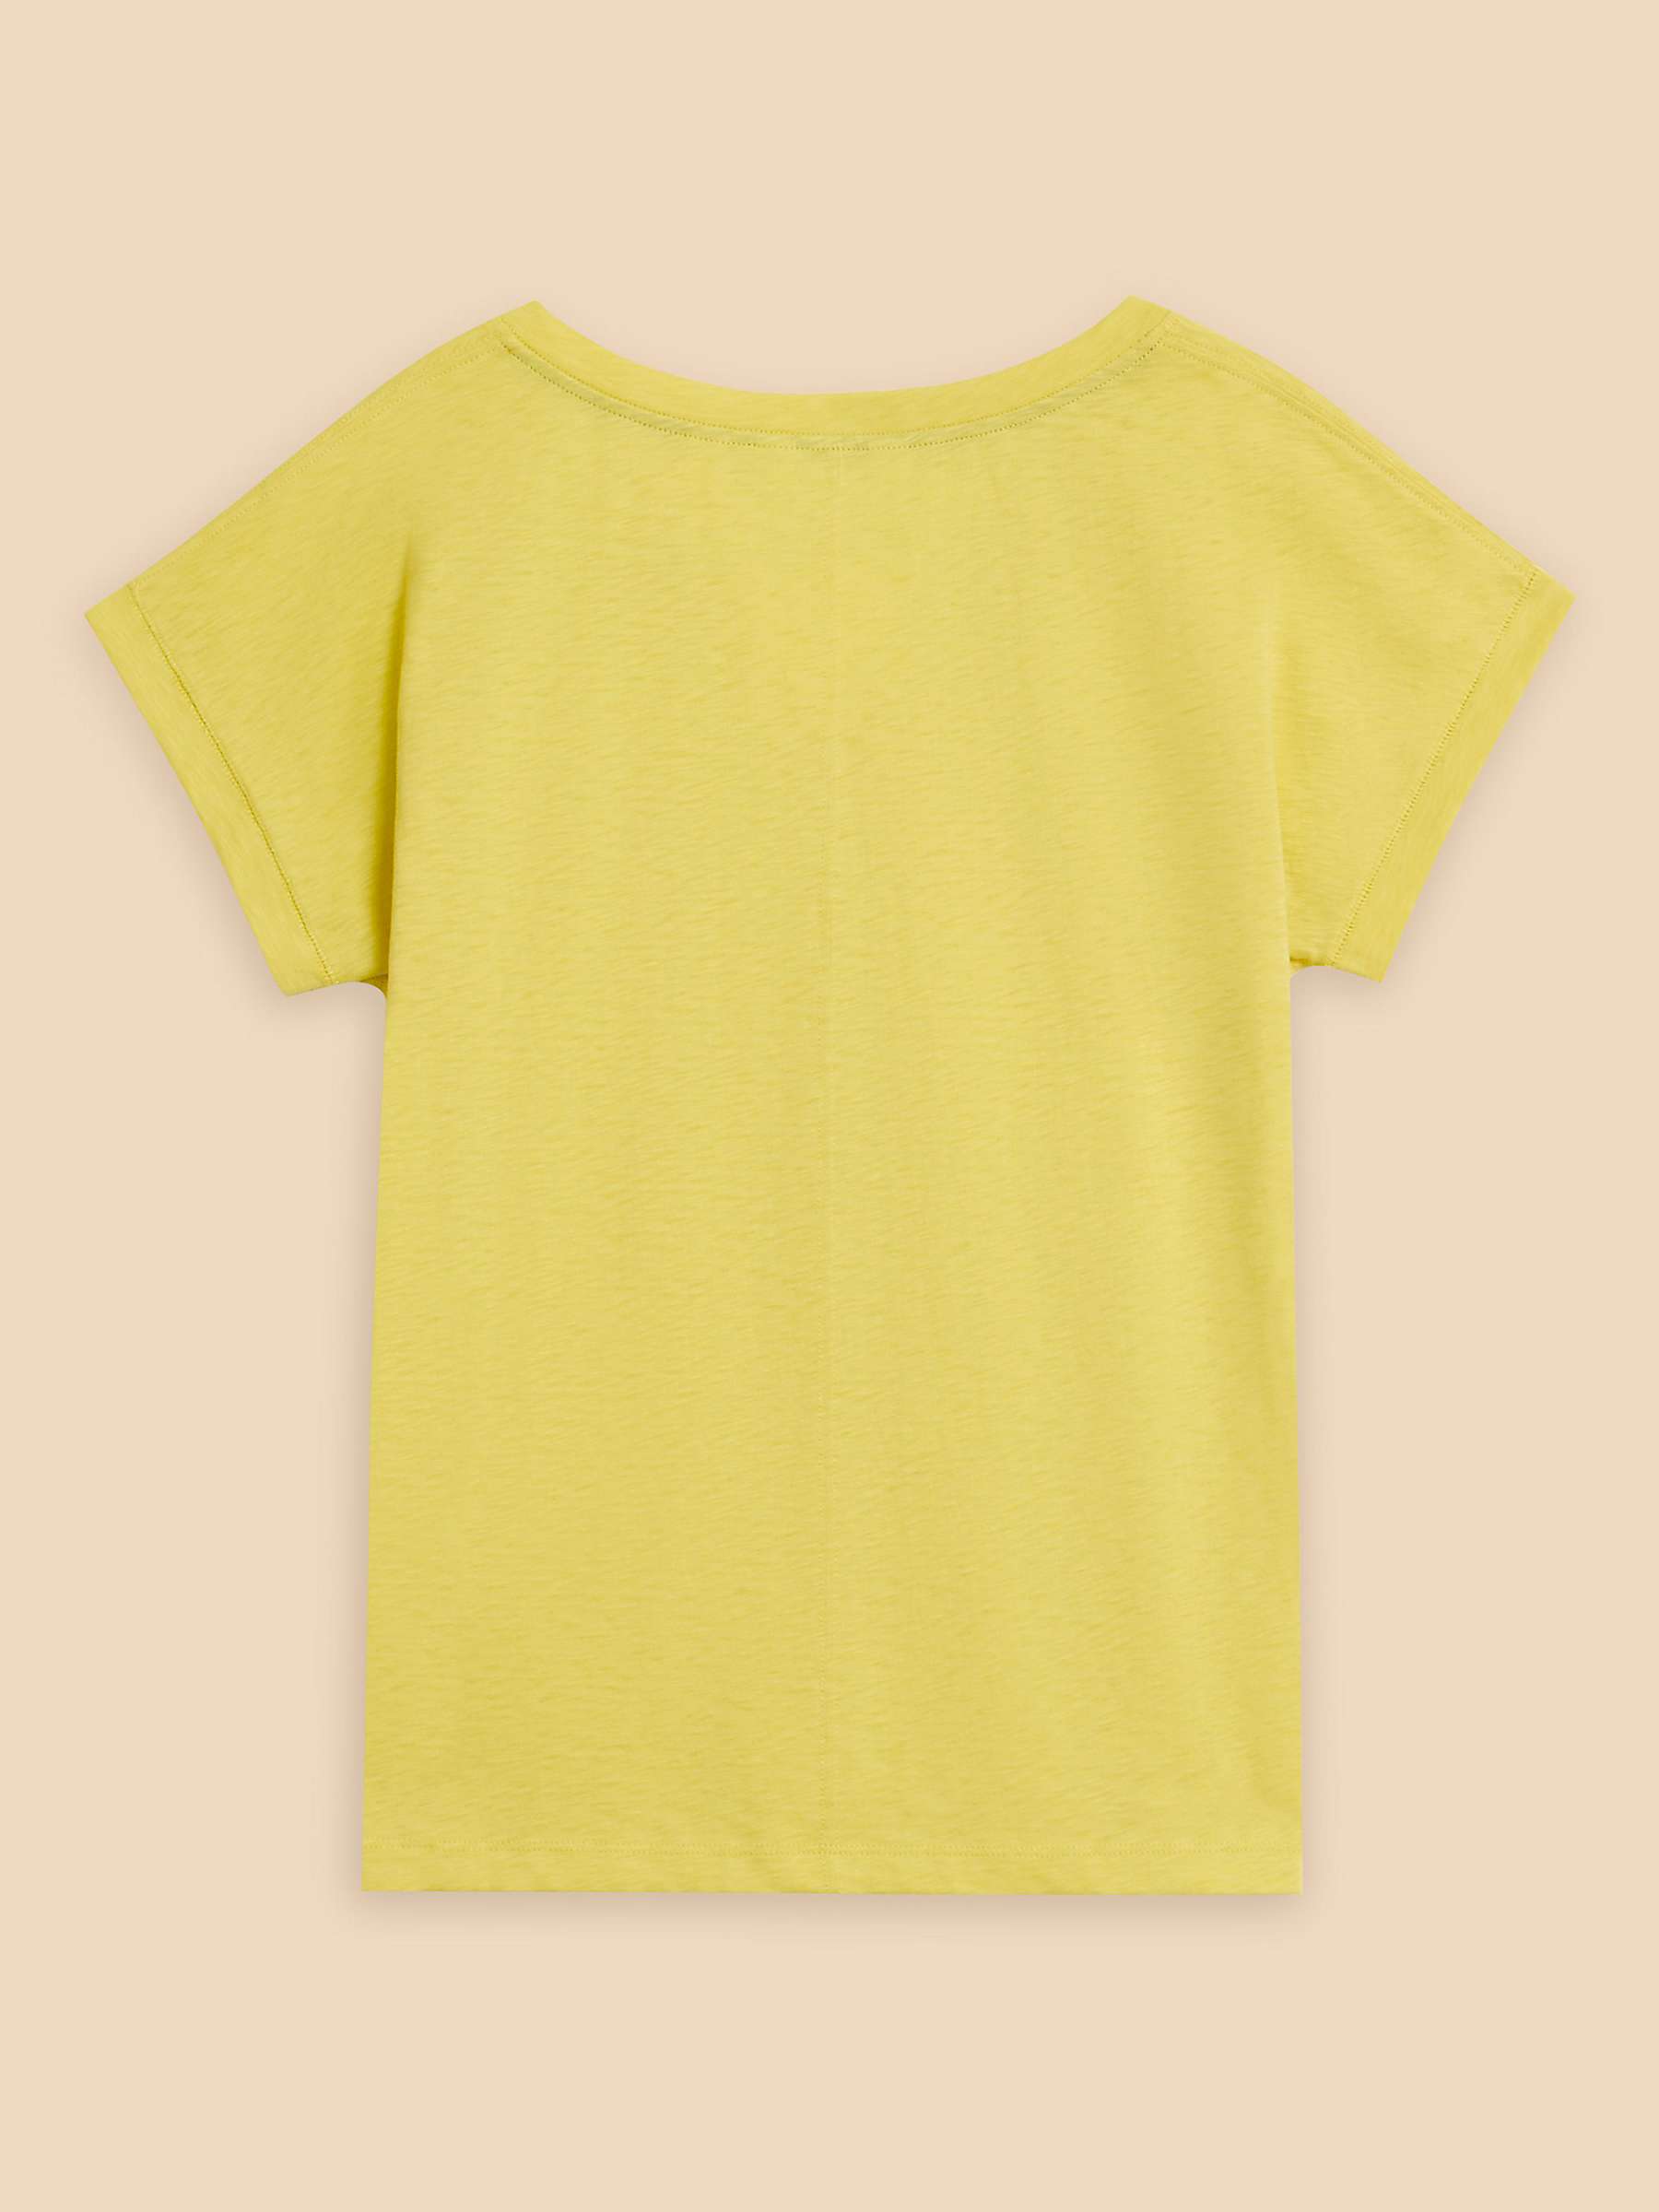 Buy White Stuff Nelly Notch Neck T-Shirt, Bright Yellow Online at johnlewis.com